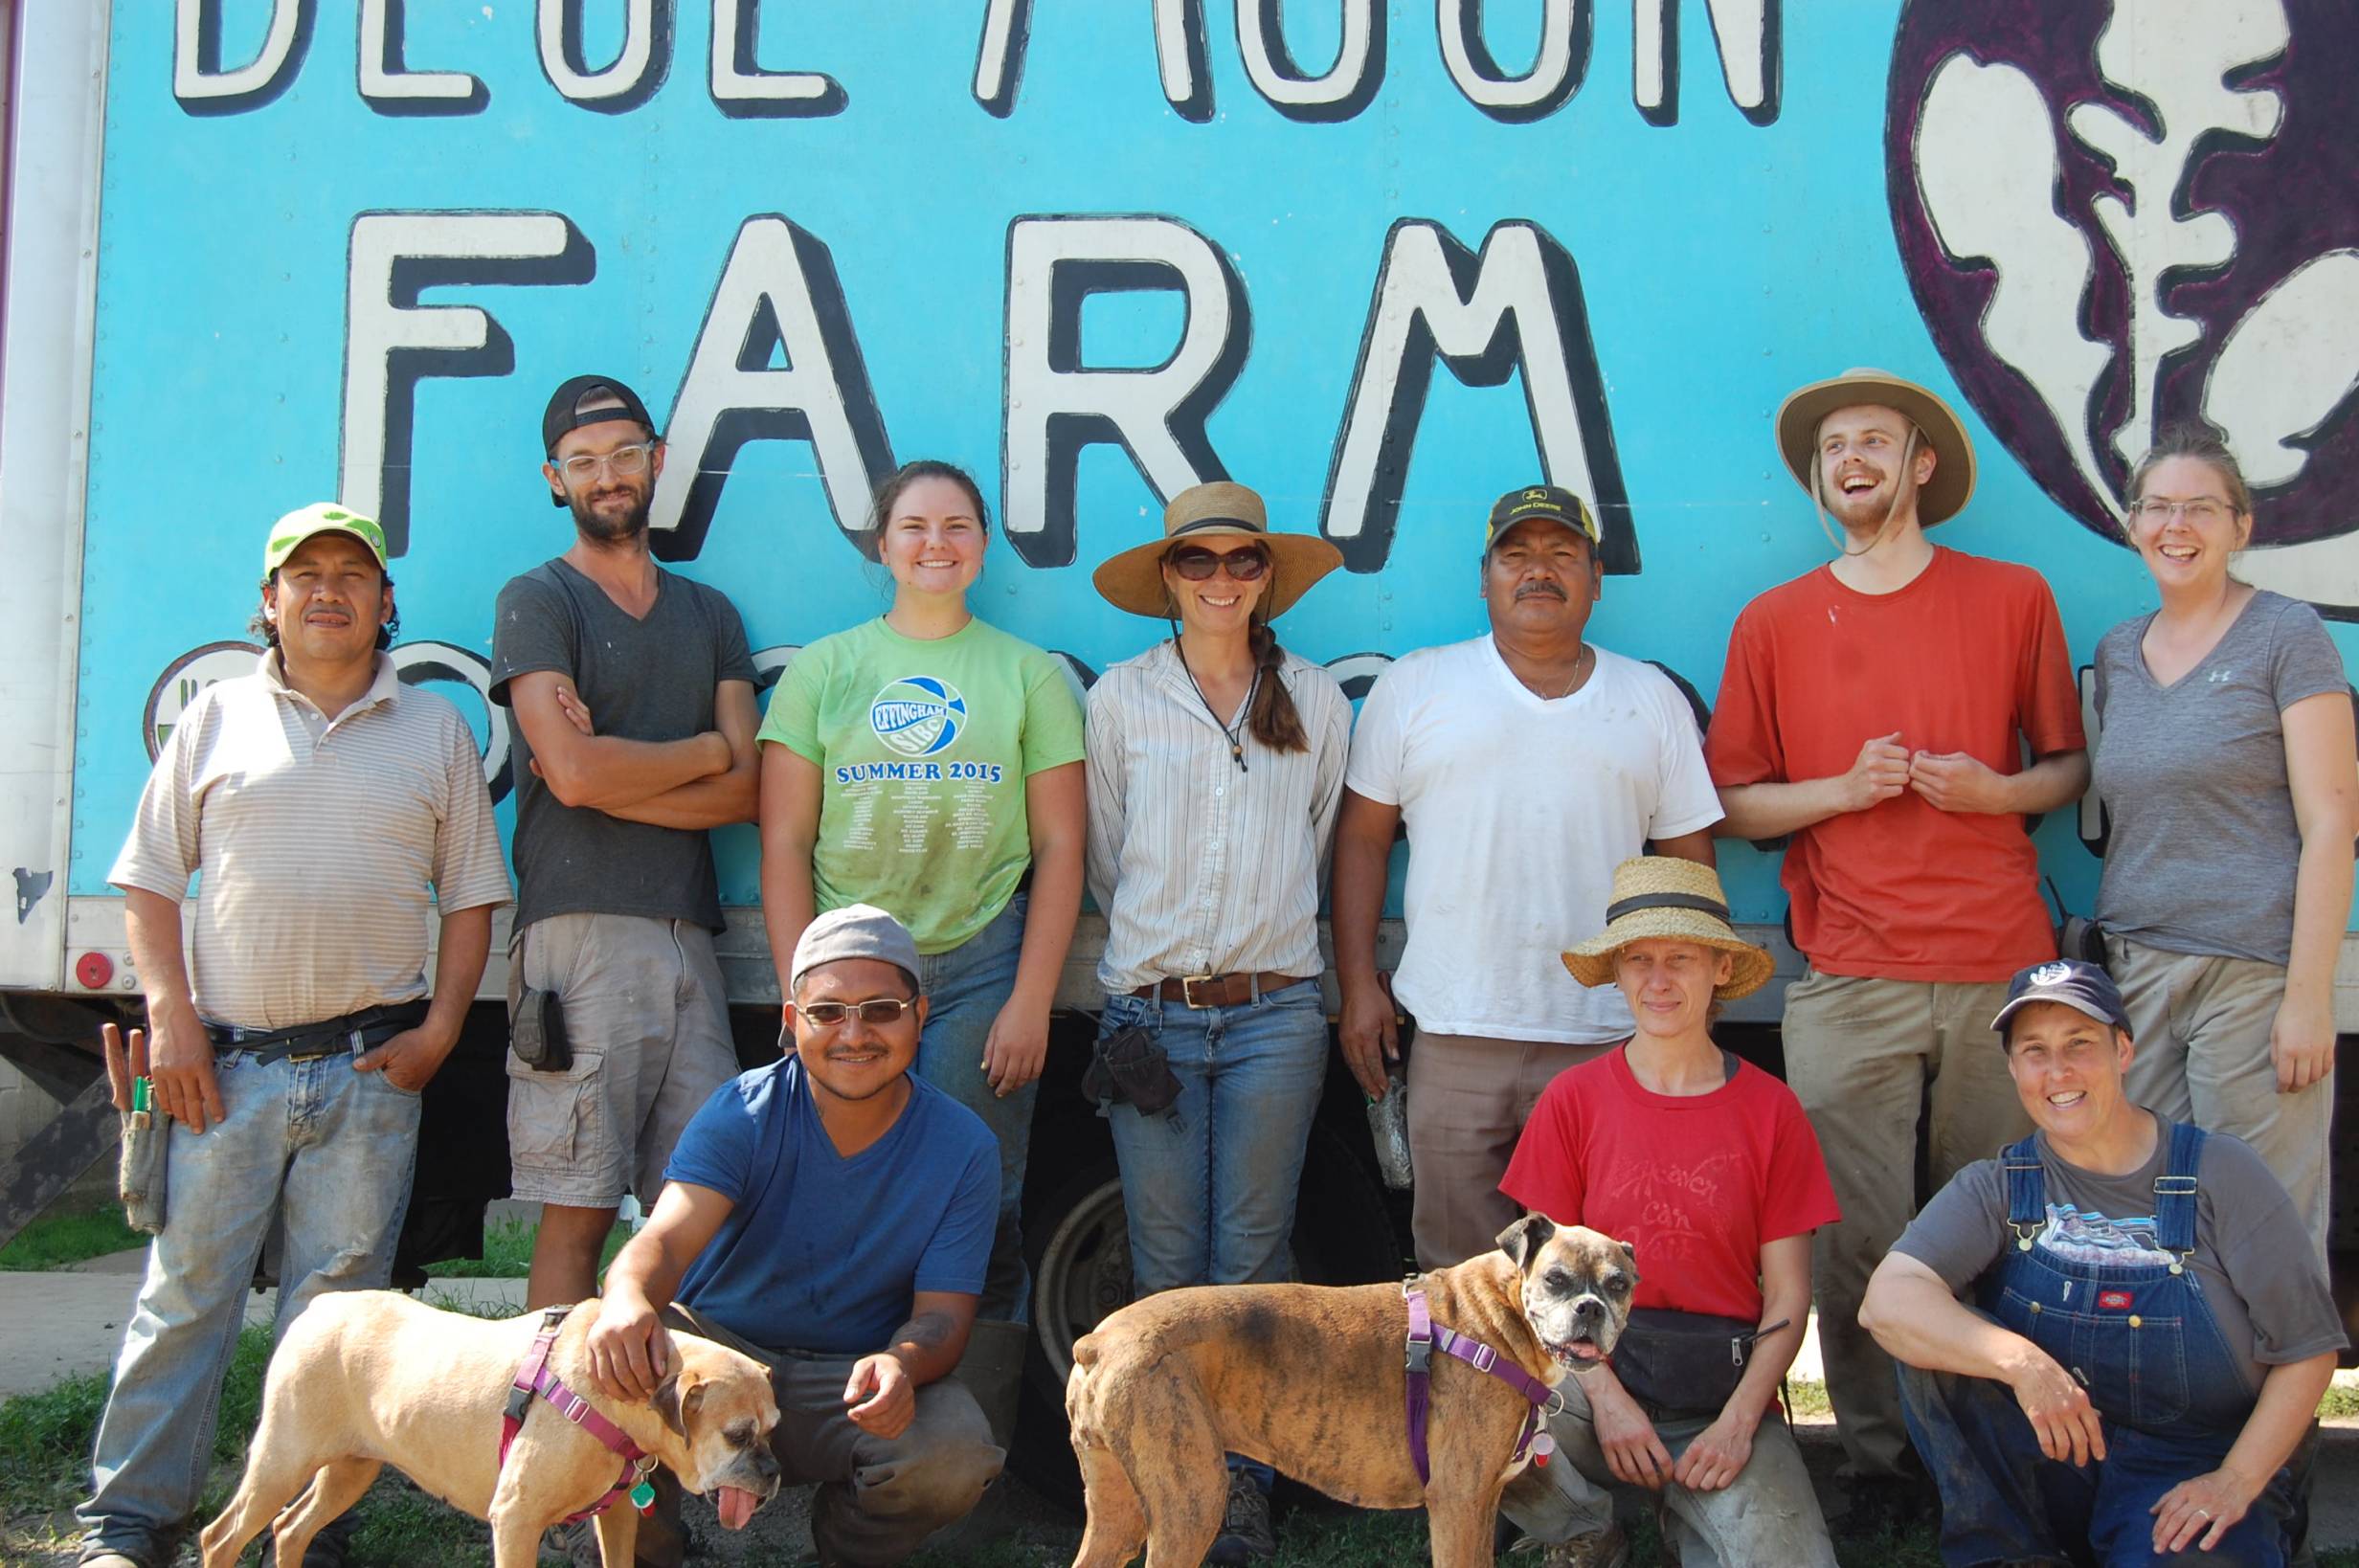 The Blue Moon Farm staff smiles in front of their beautifully painted farm truck. Photo by Blue Moon Farm.